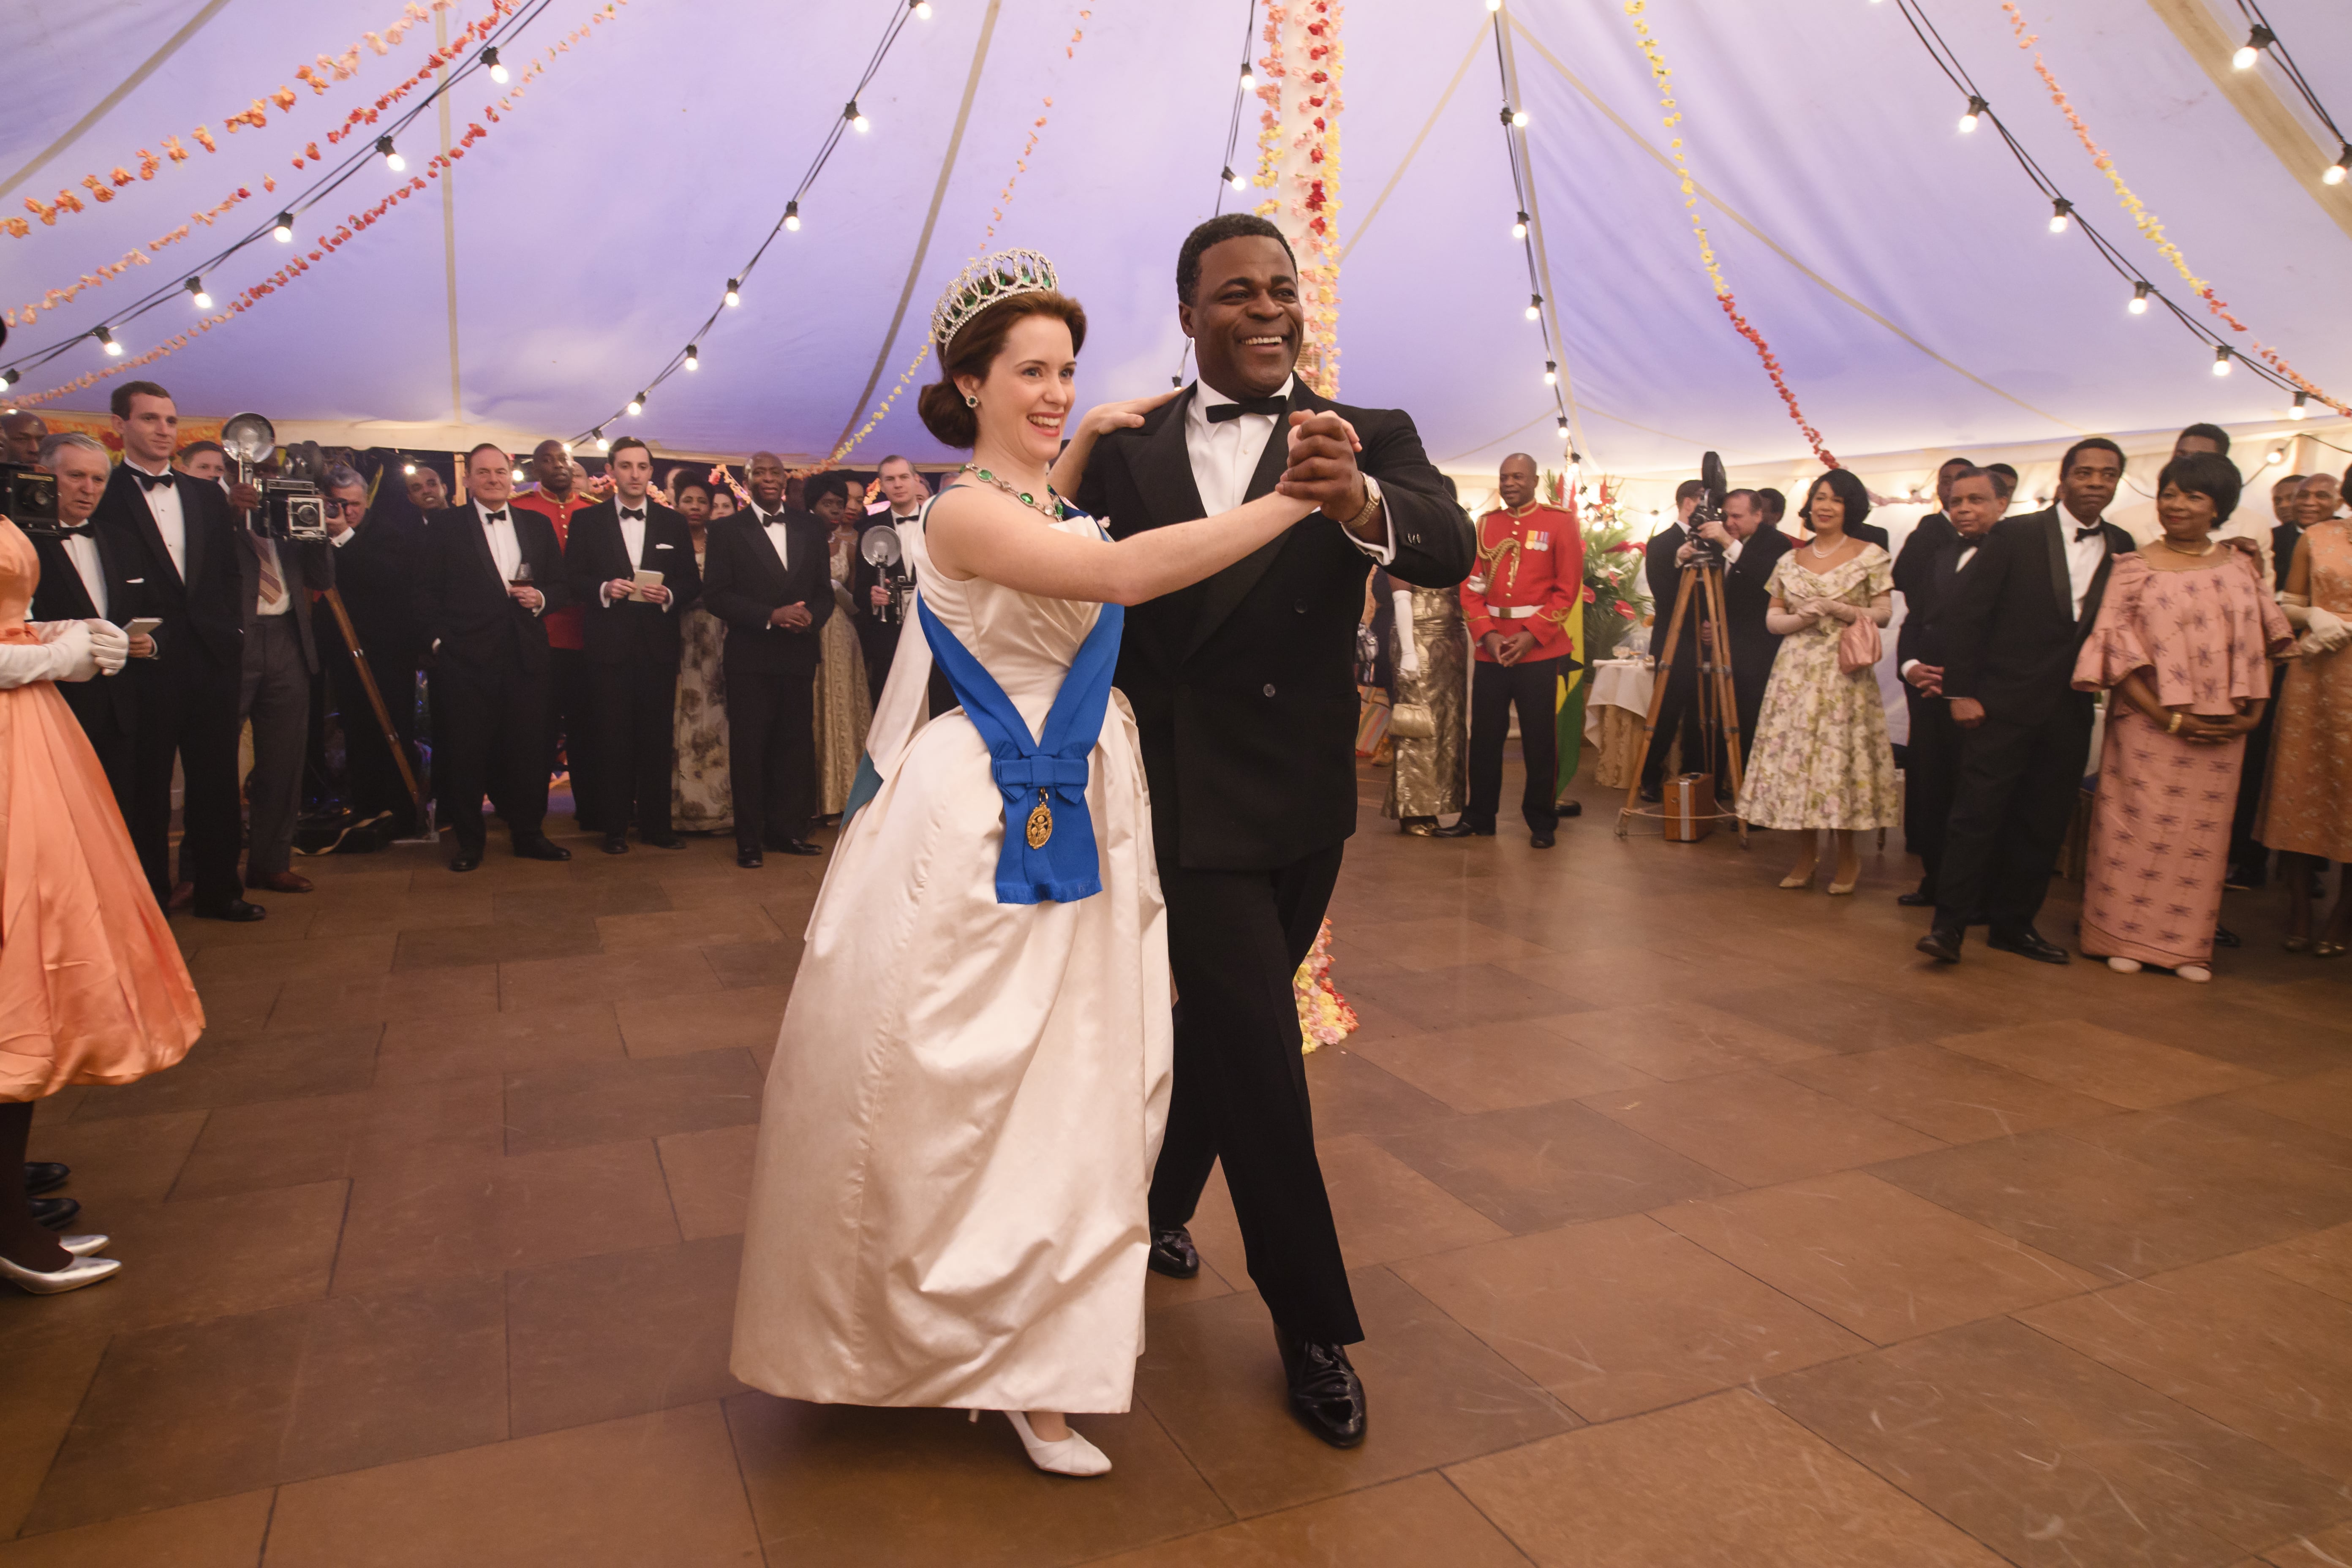 Did Kwame Nkrumah really dance with Queen Elizabeth when she